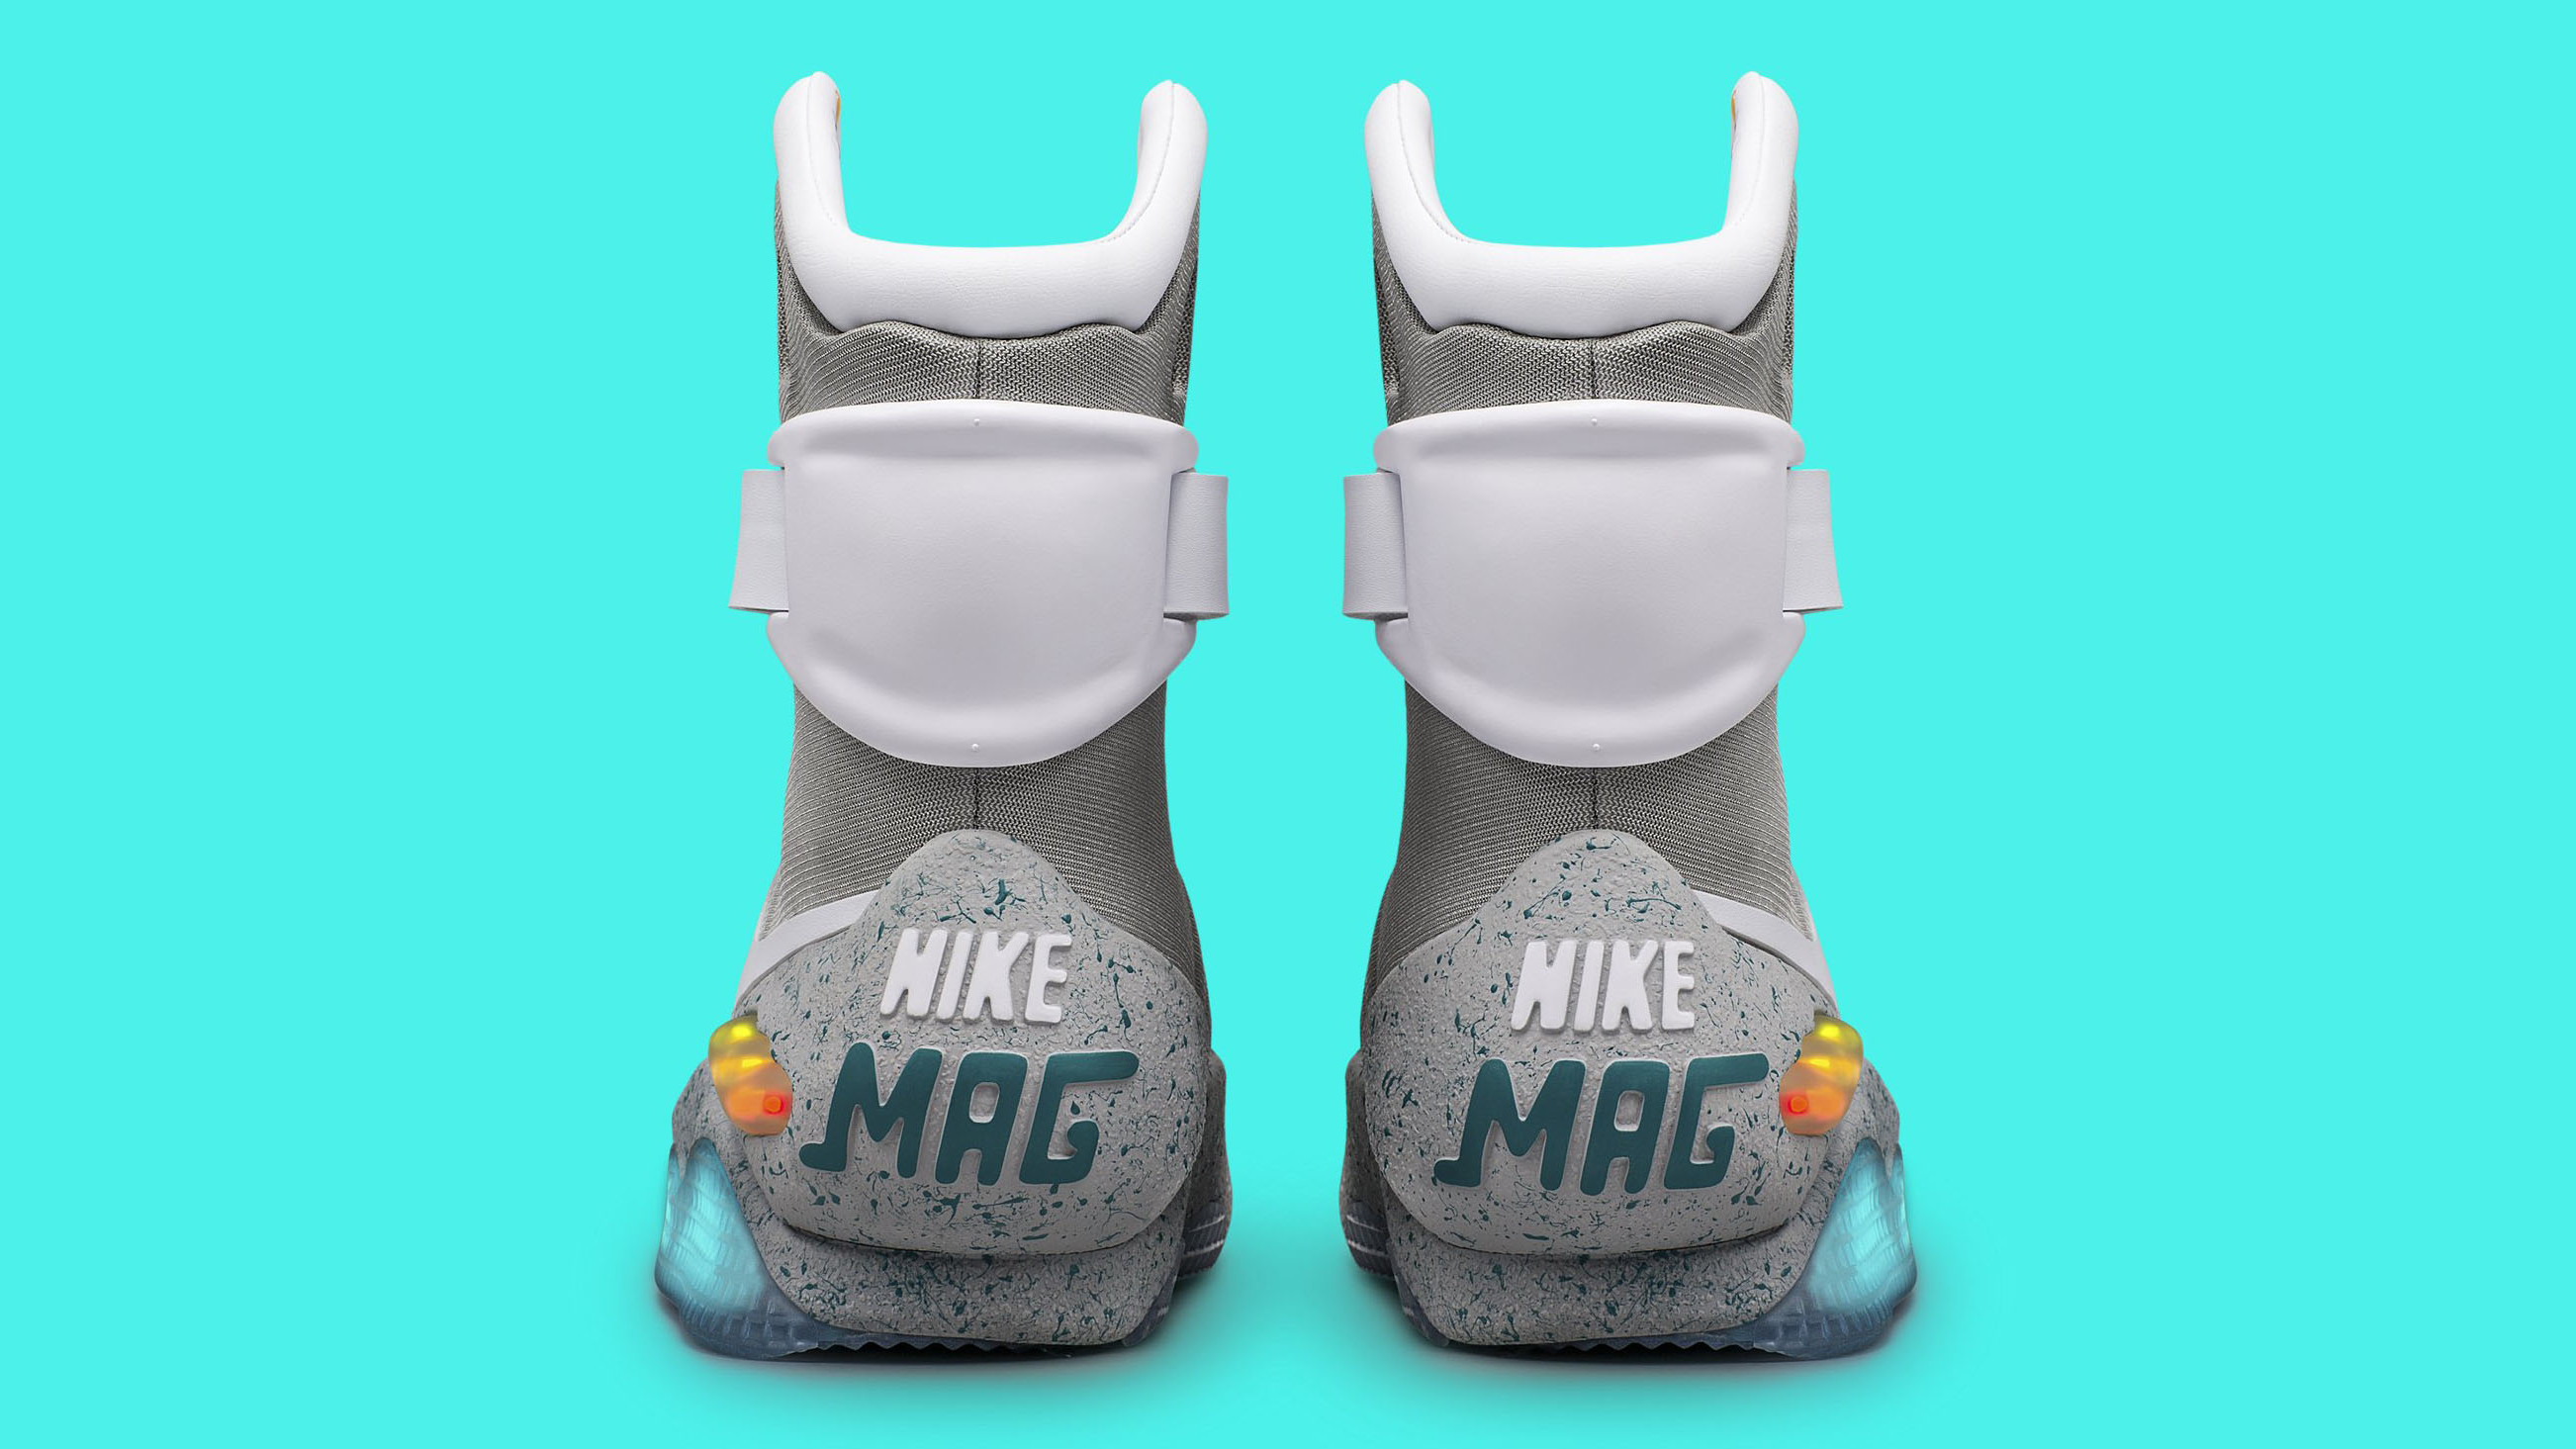 The Complete Nike Mag Price Complex